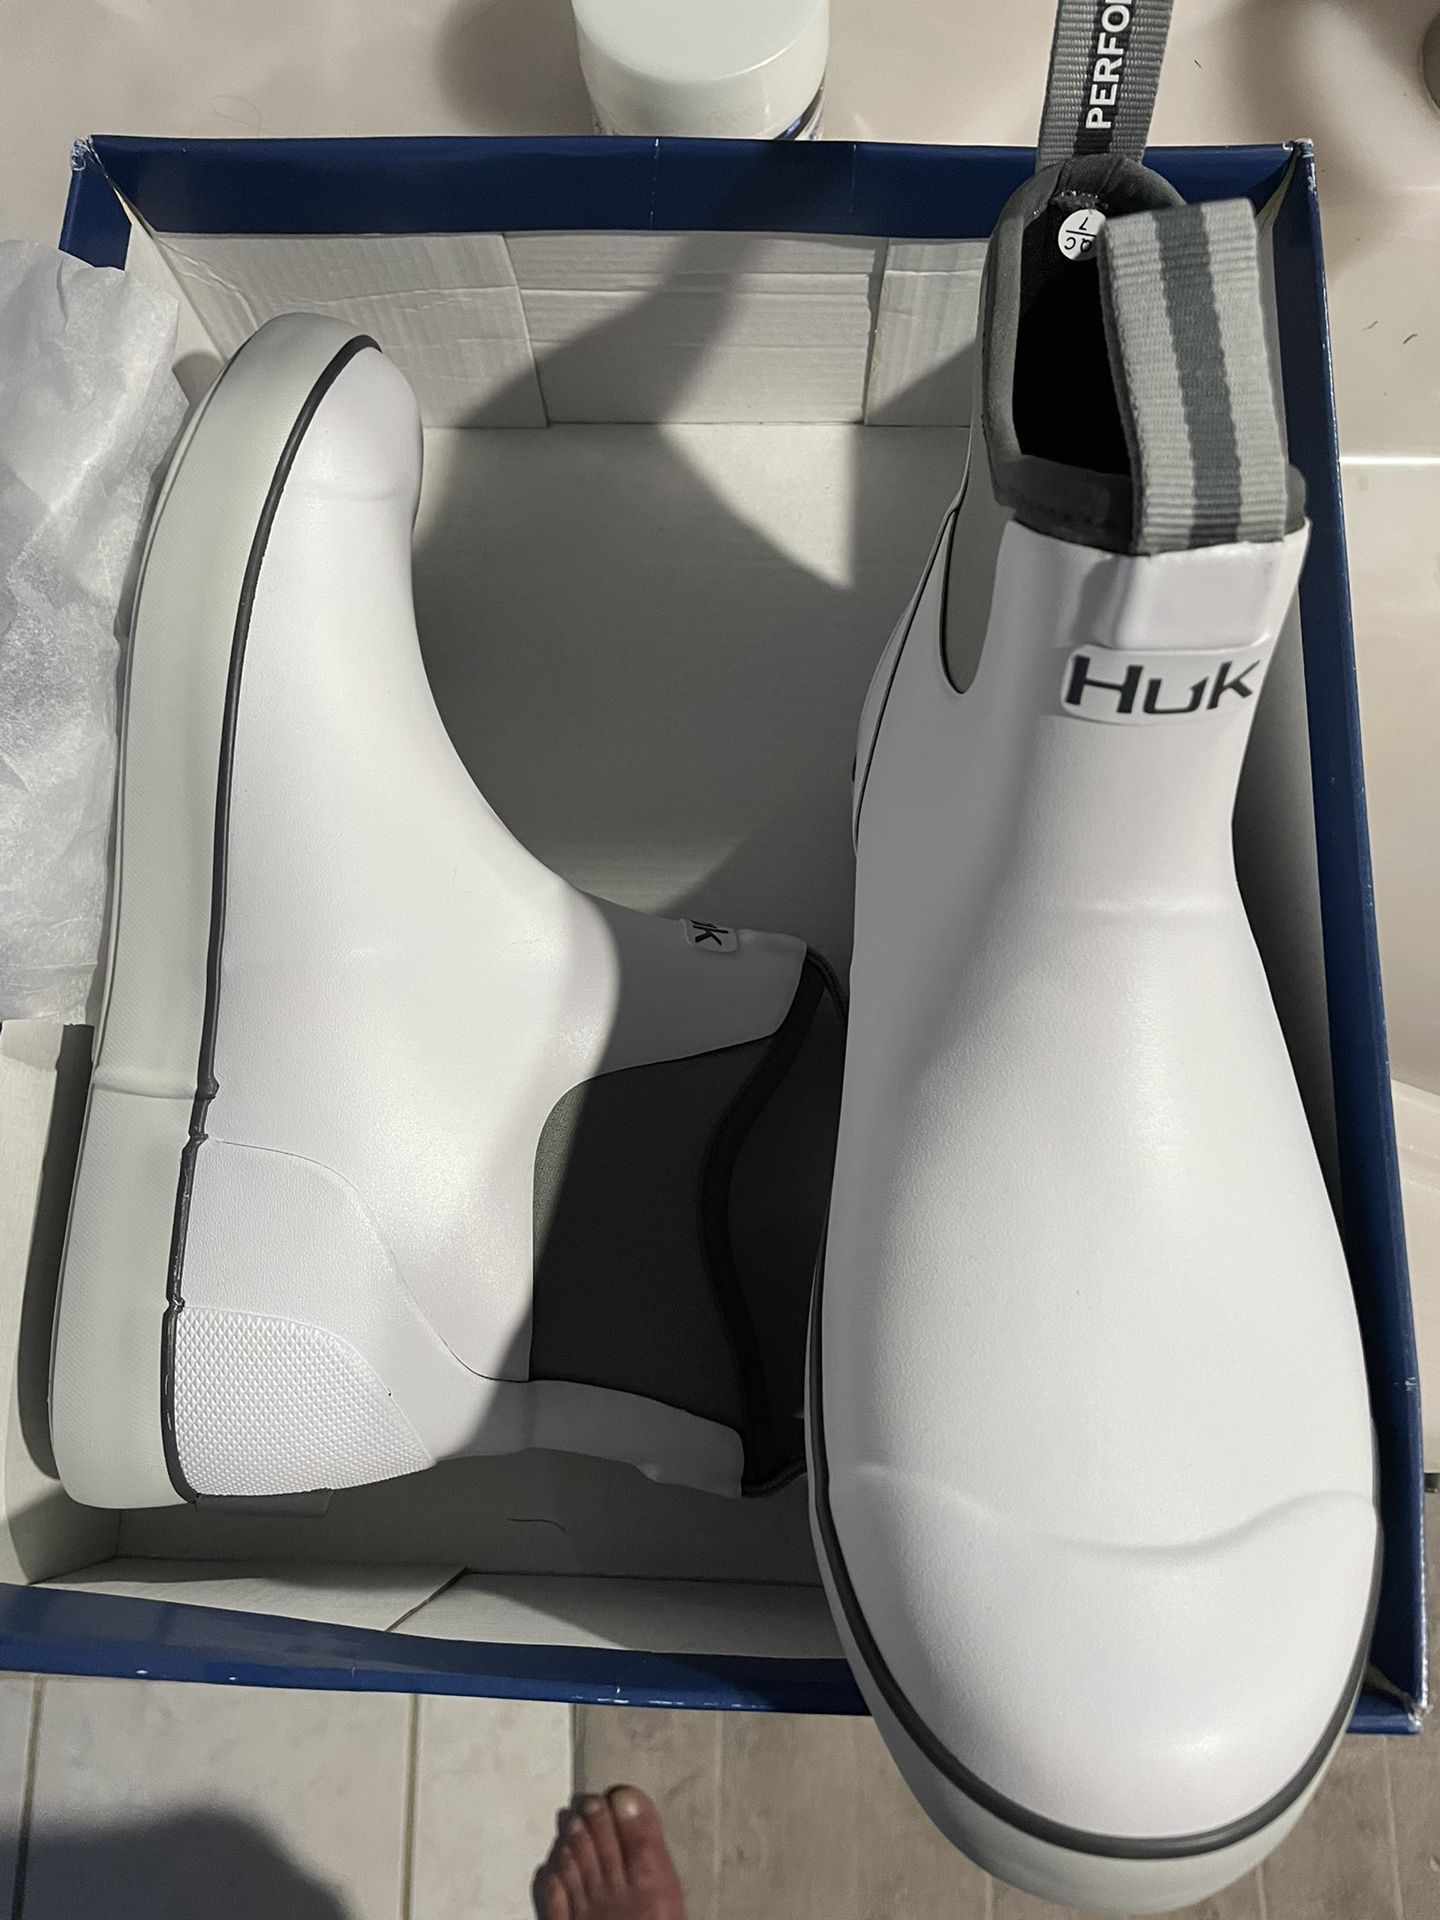 Huk Rubber Boots